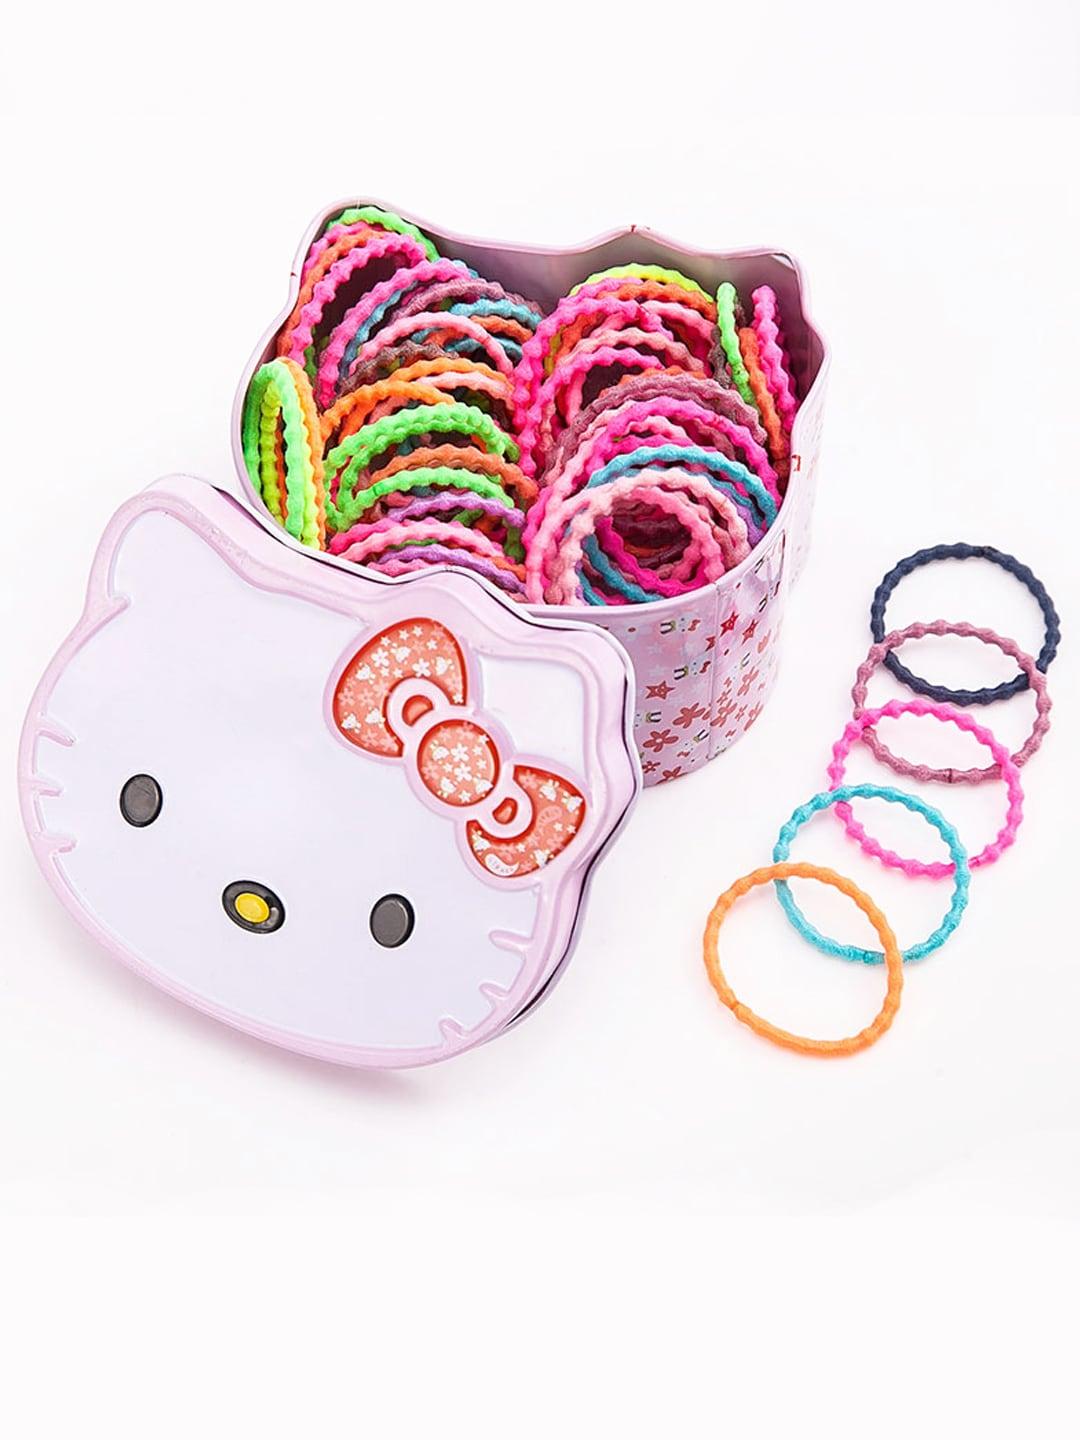 Yellow Chimes Girls Set of 100 Pcs Holders Neon Colors with Kitty Tin Storage Box